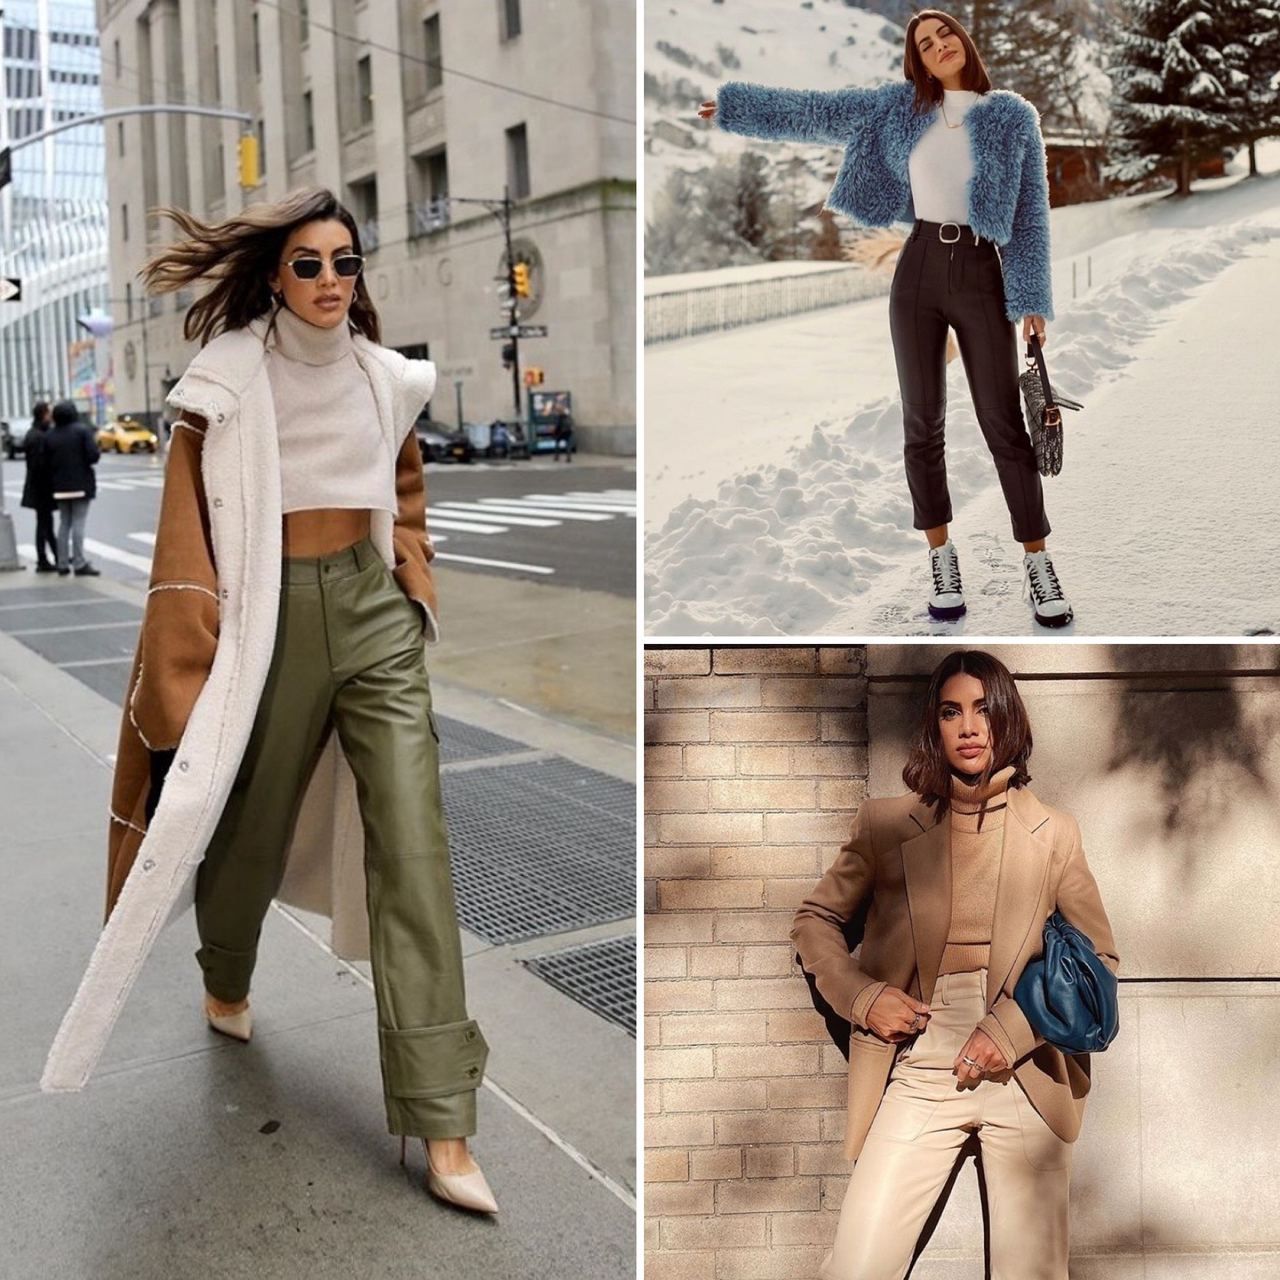 How to wear leather pants this winter? Learn from celebrities' outfits